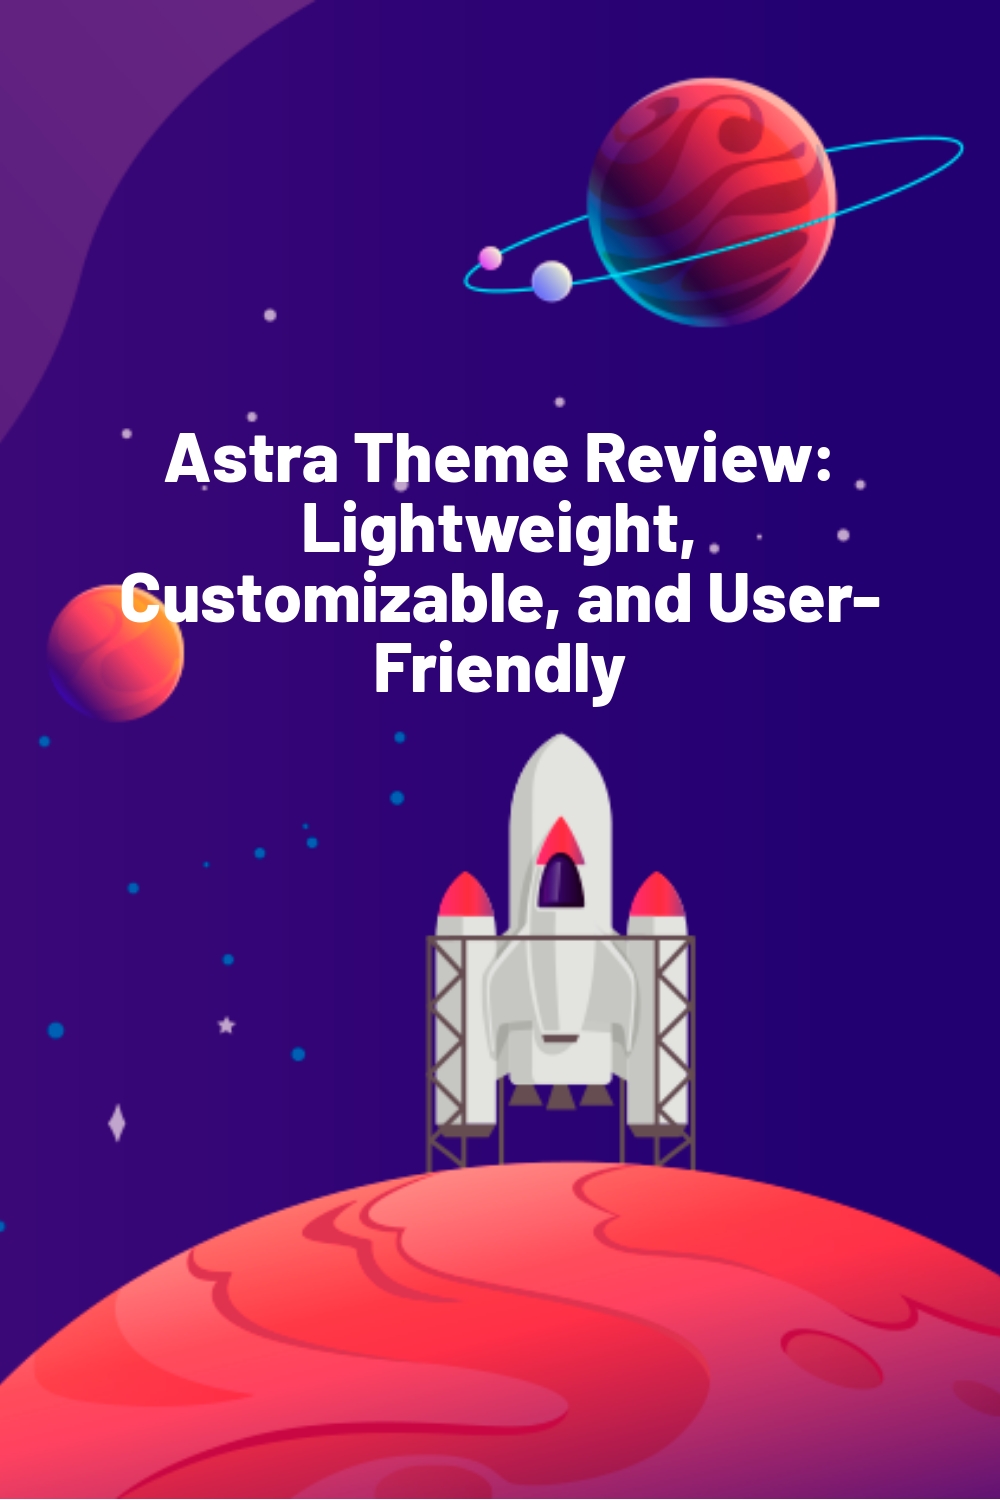 Astra Theme Review: Lightweight, Customizable, and User-Friendly